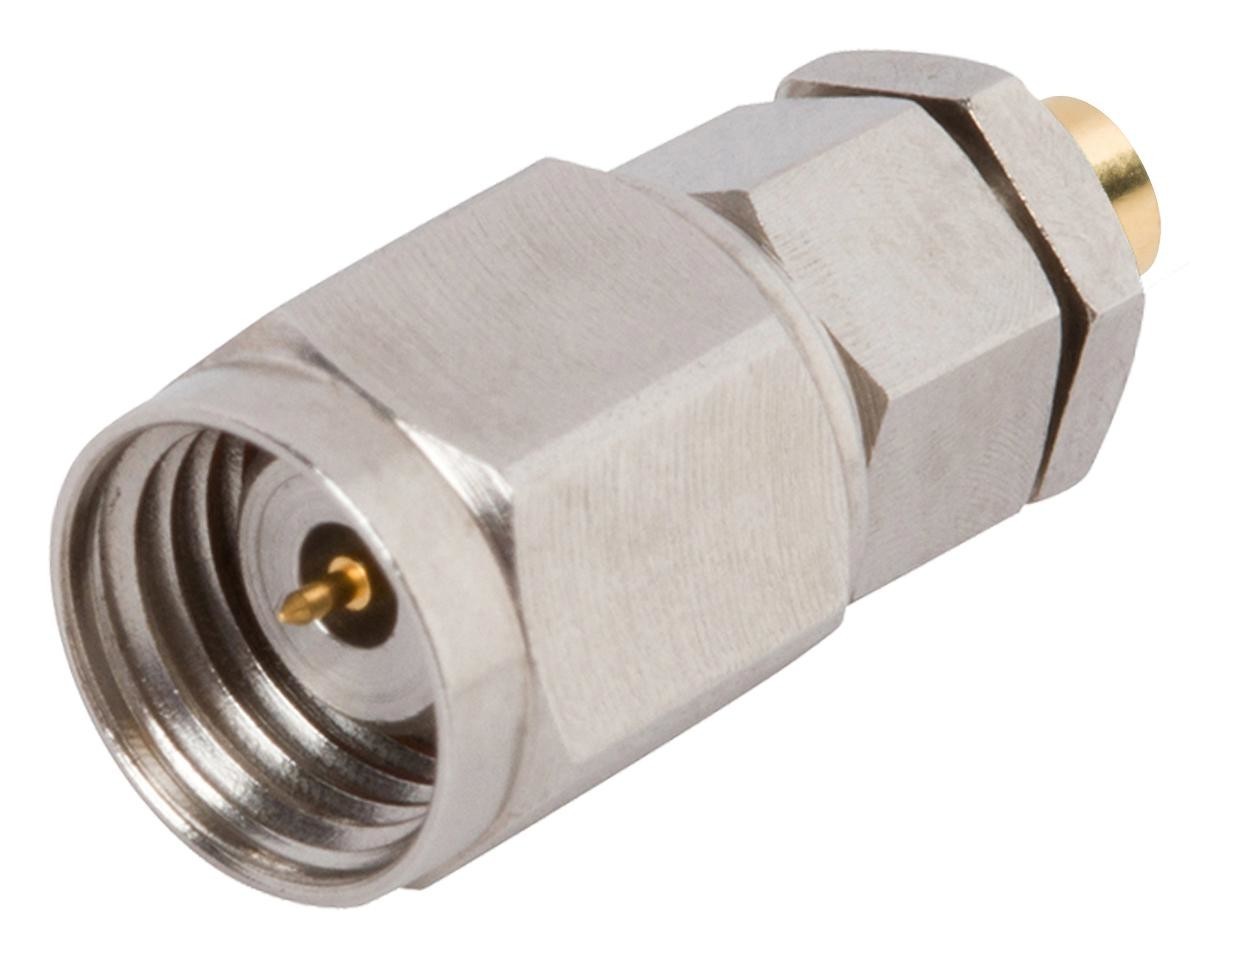 Amphenol SV Microwave 1611-60028 Rf Coax Connector, 2.4mm Plug, Cable, 50 Ohm